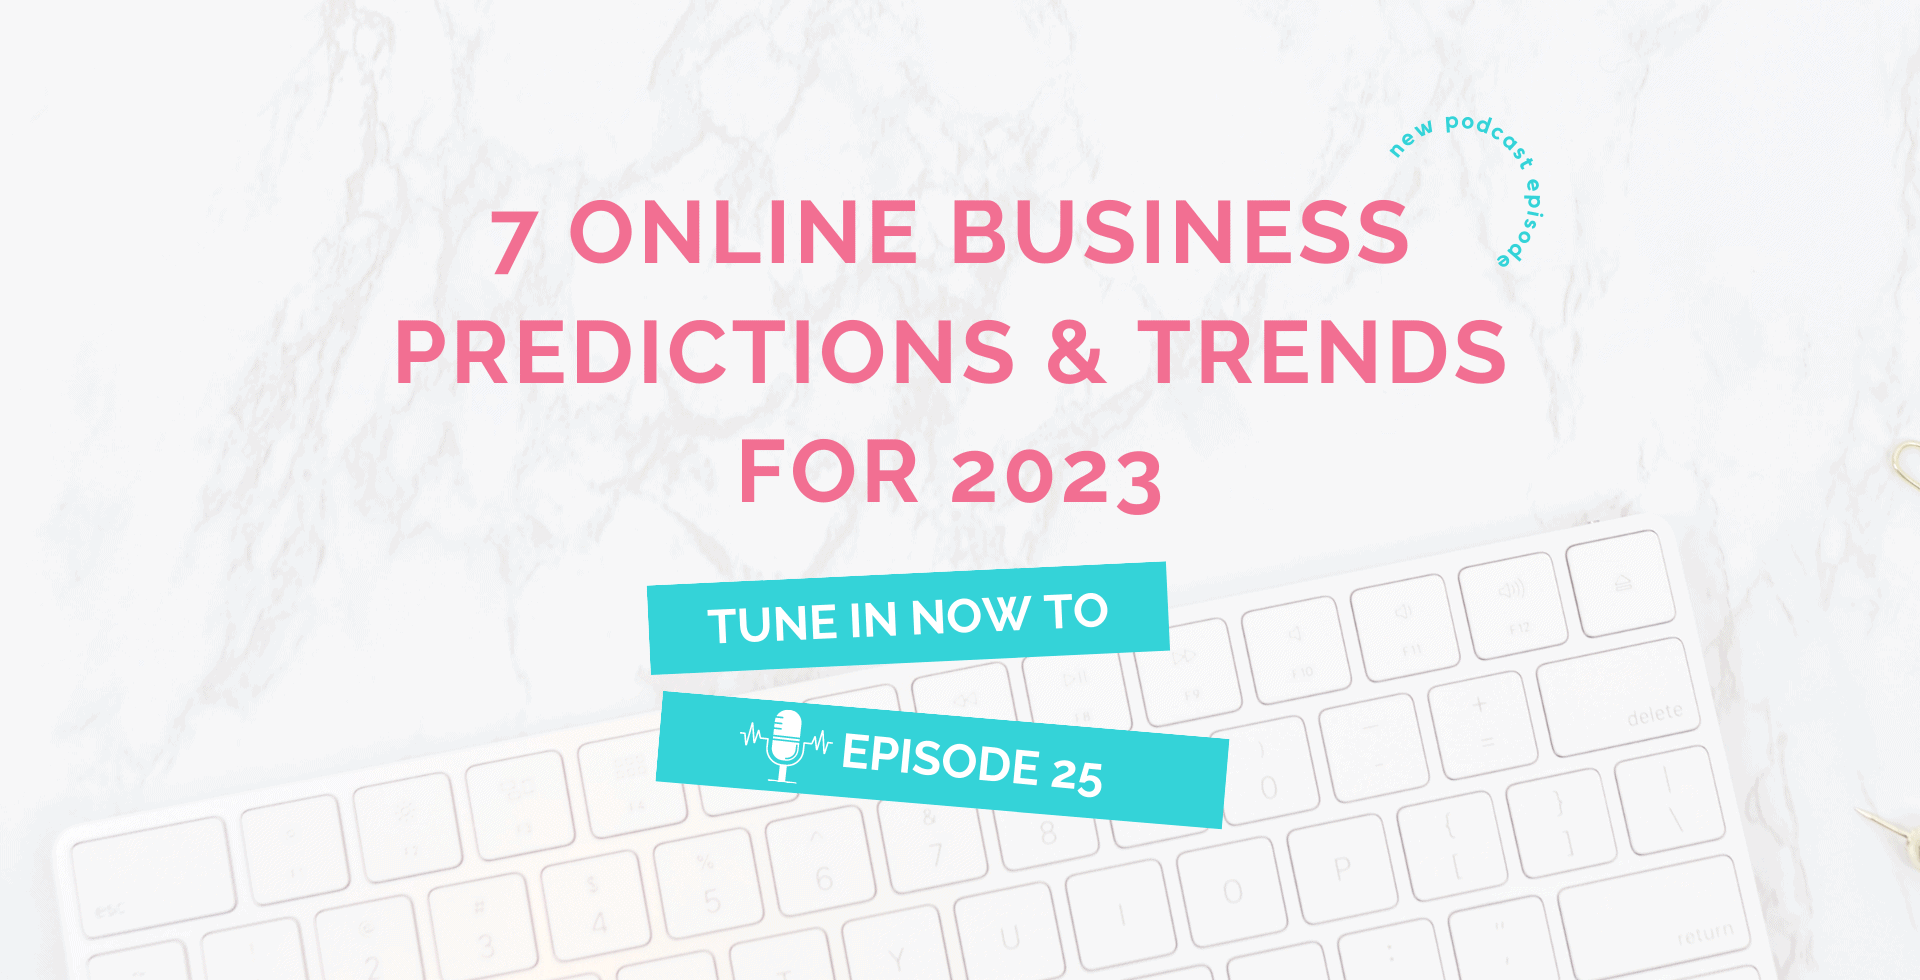 7 Online Business Predictions & Trends for 2023